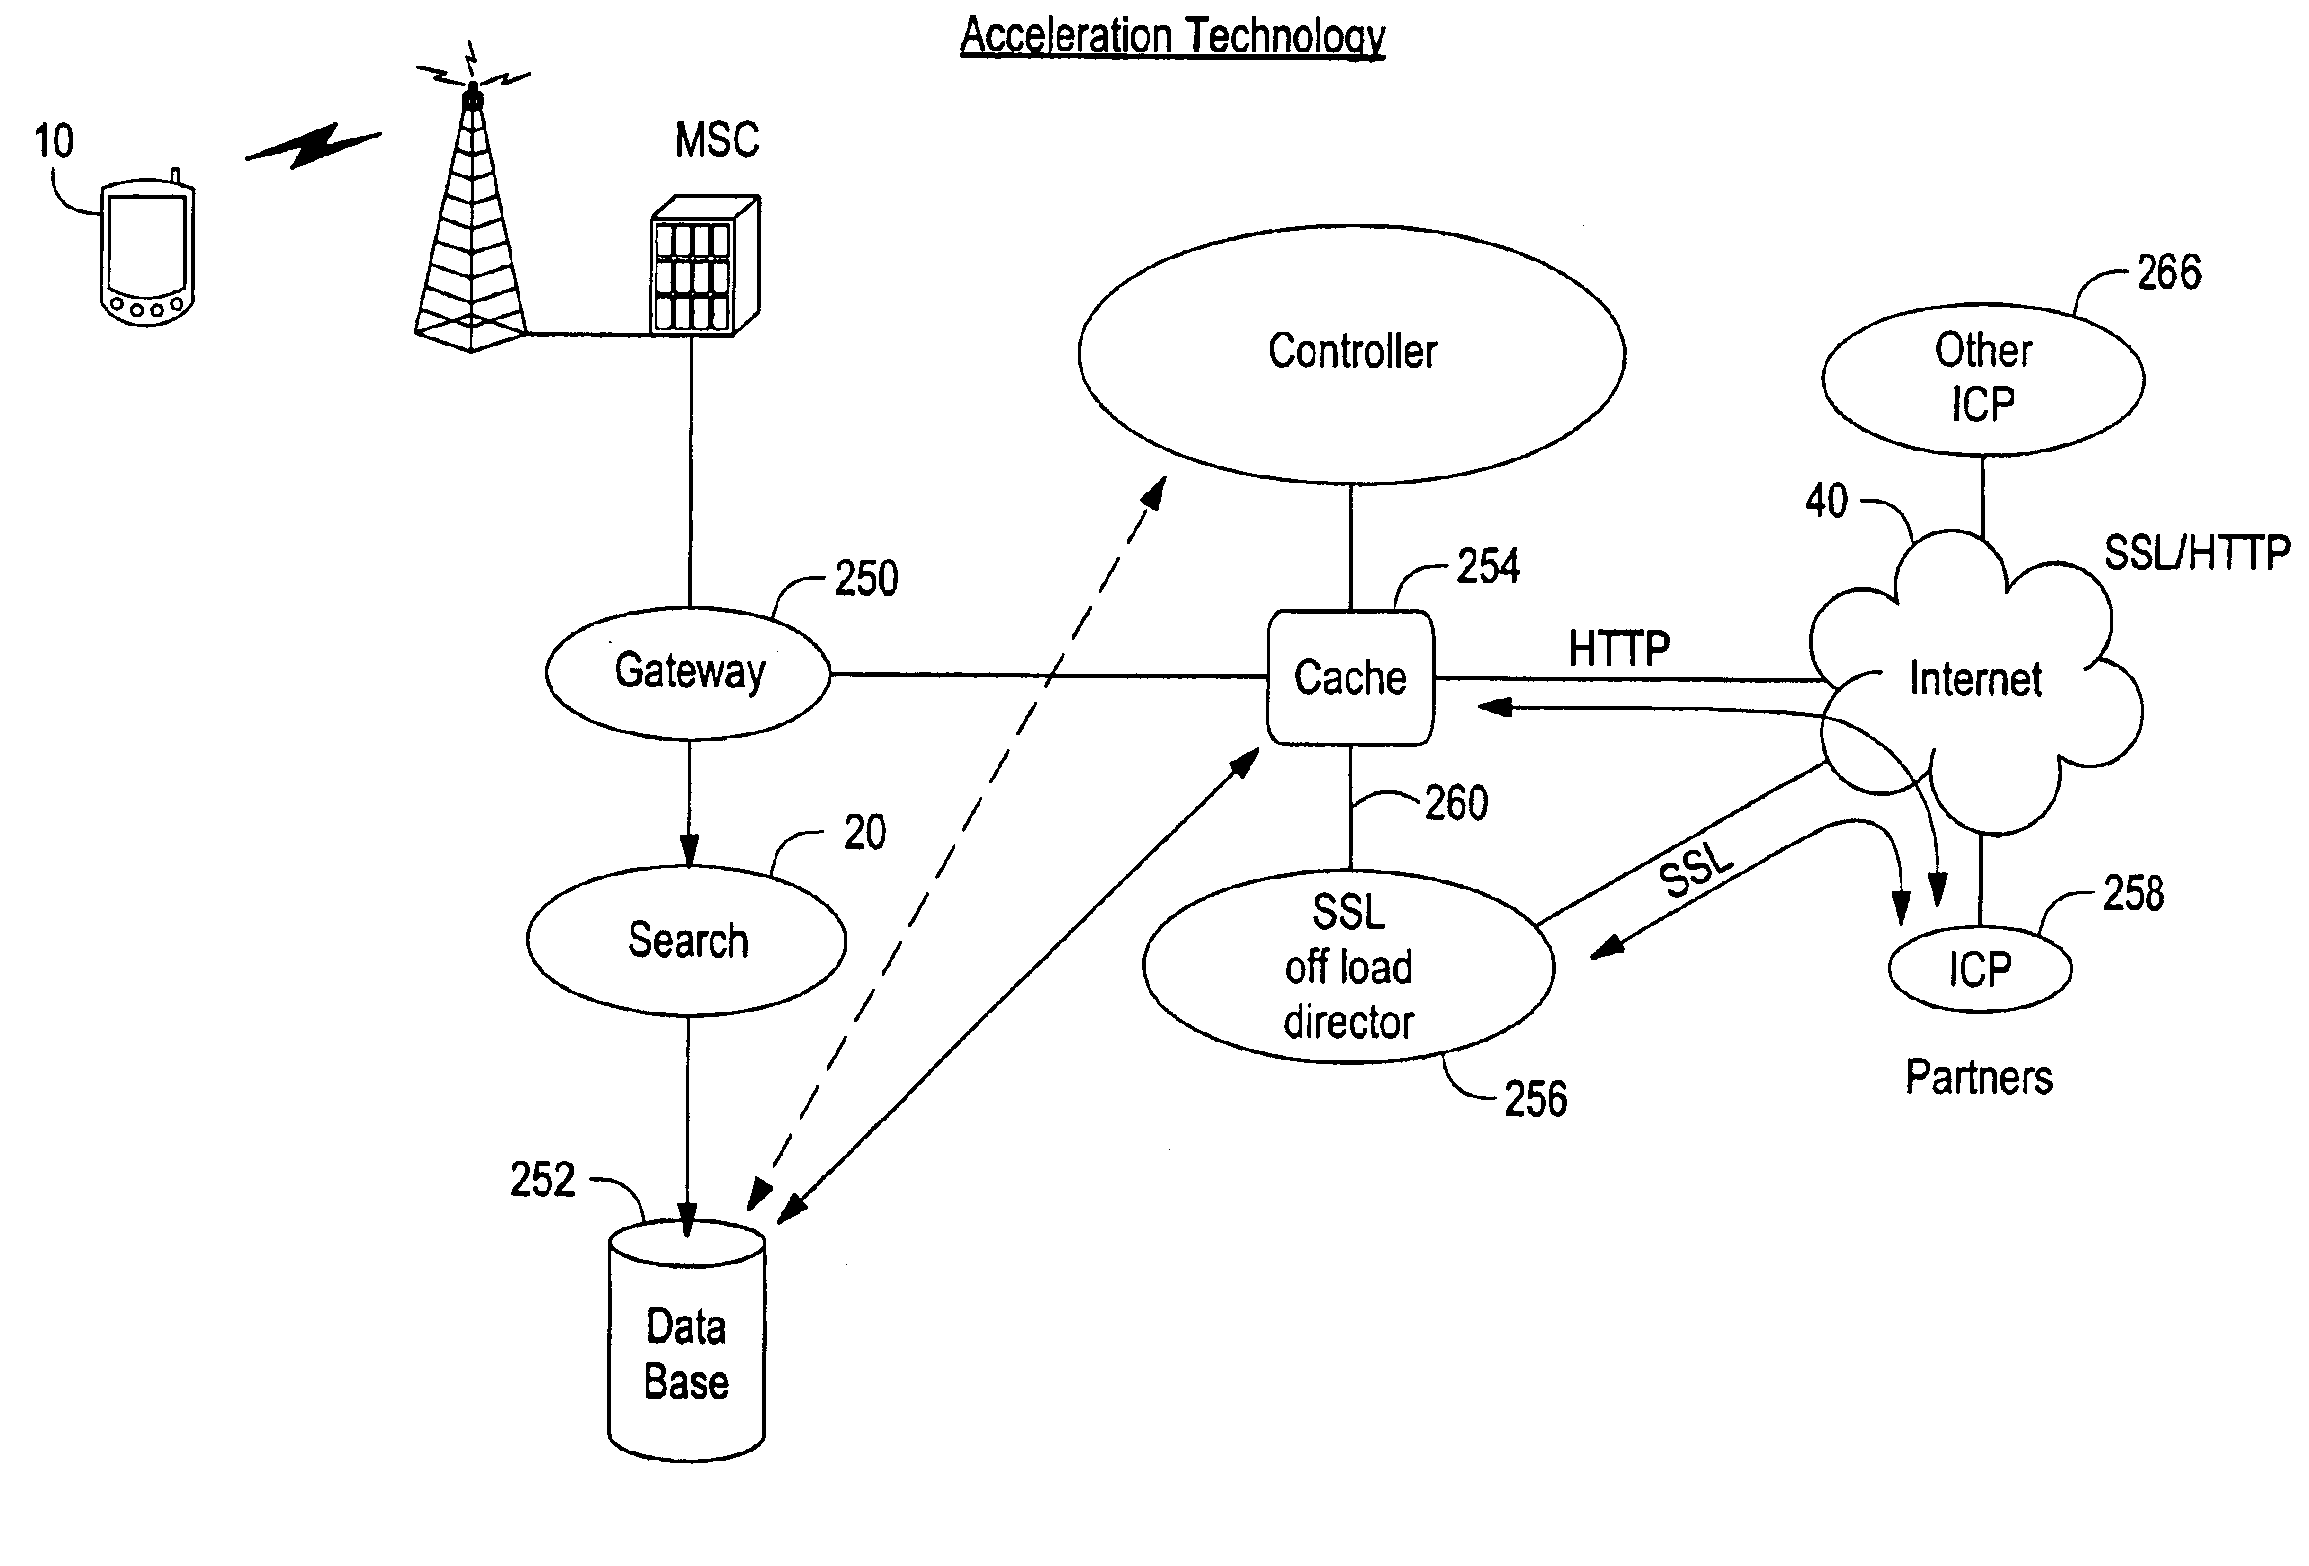 Global data network using existing wireless infrastructures